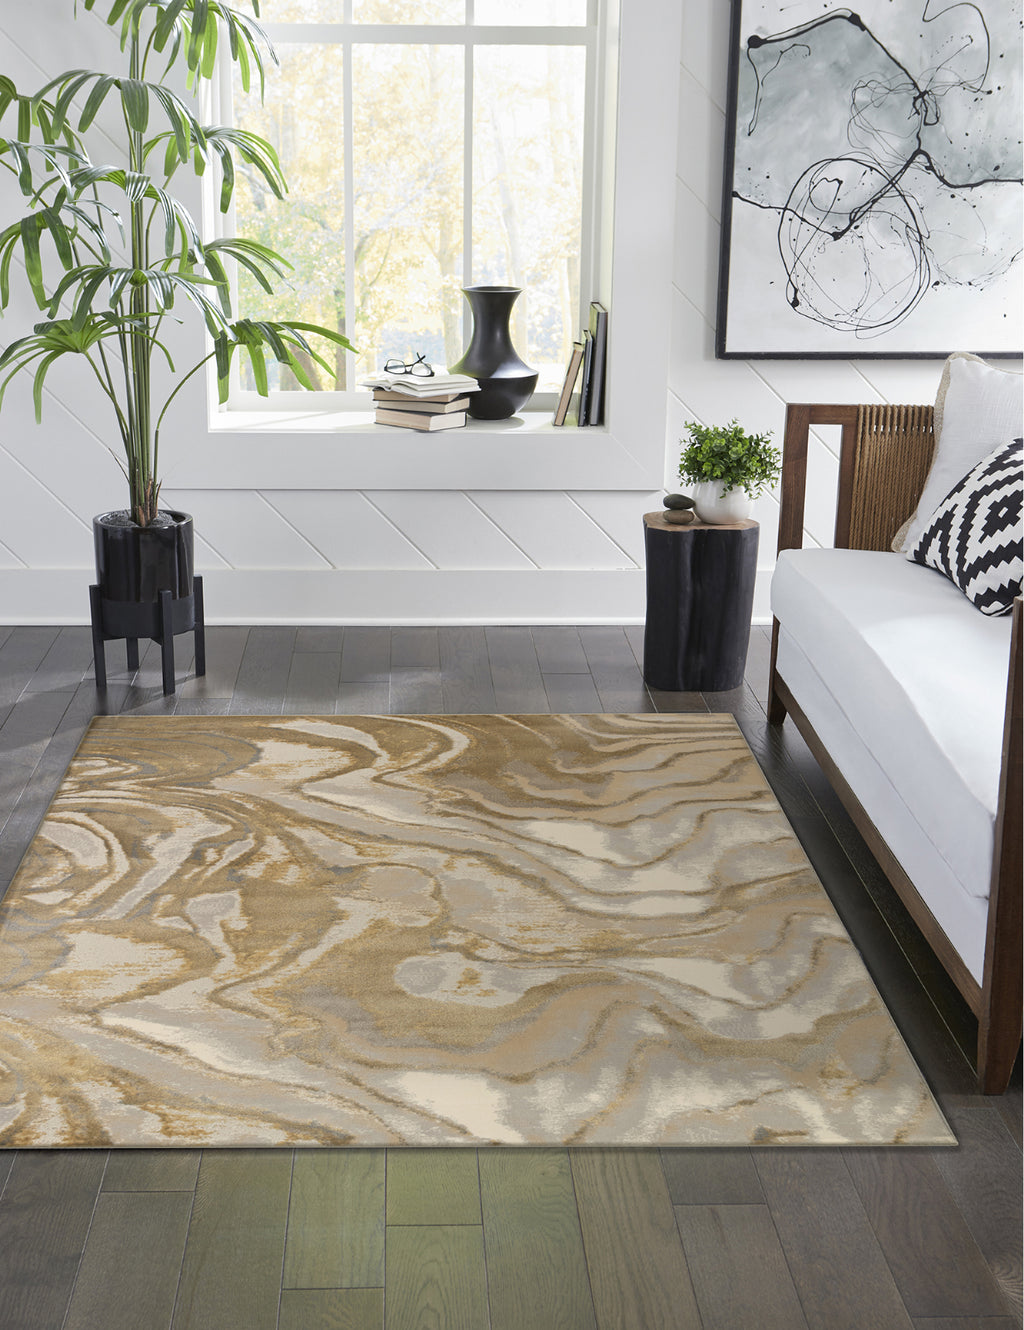 Trans Ocean Soho 7100/09 Agate Gold Area Rug by Liora Manne Room Scene Image Feature